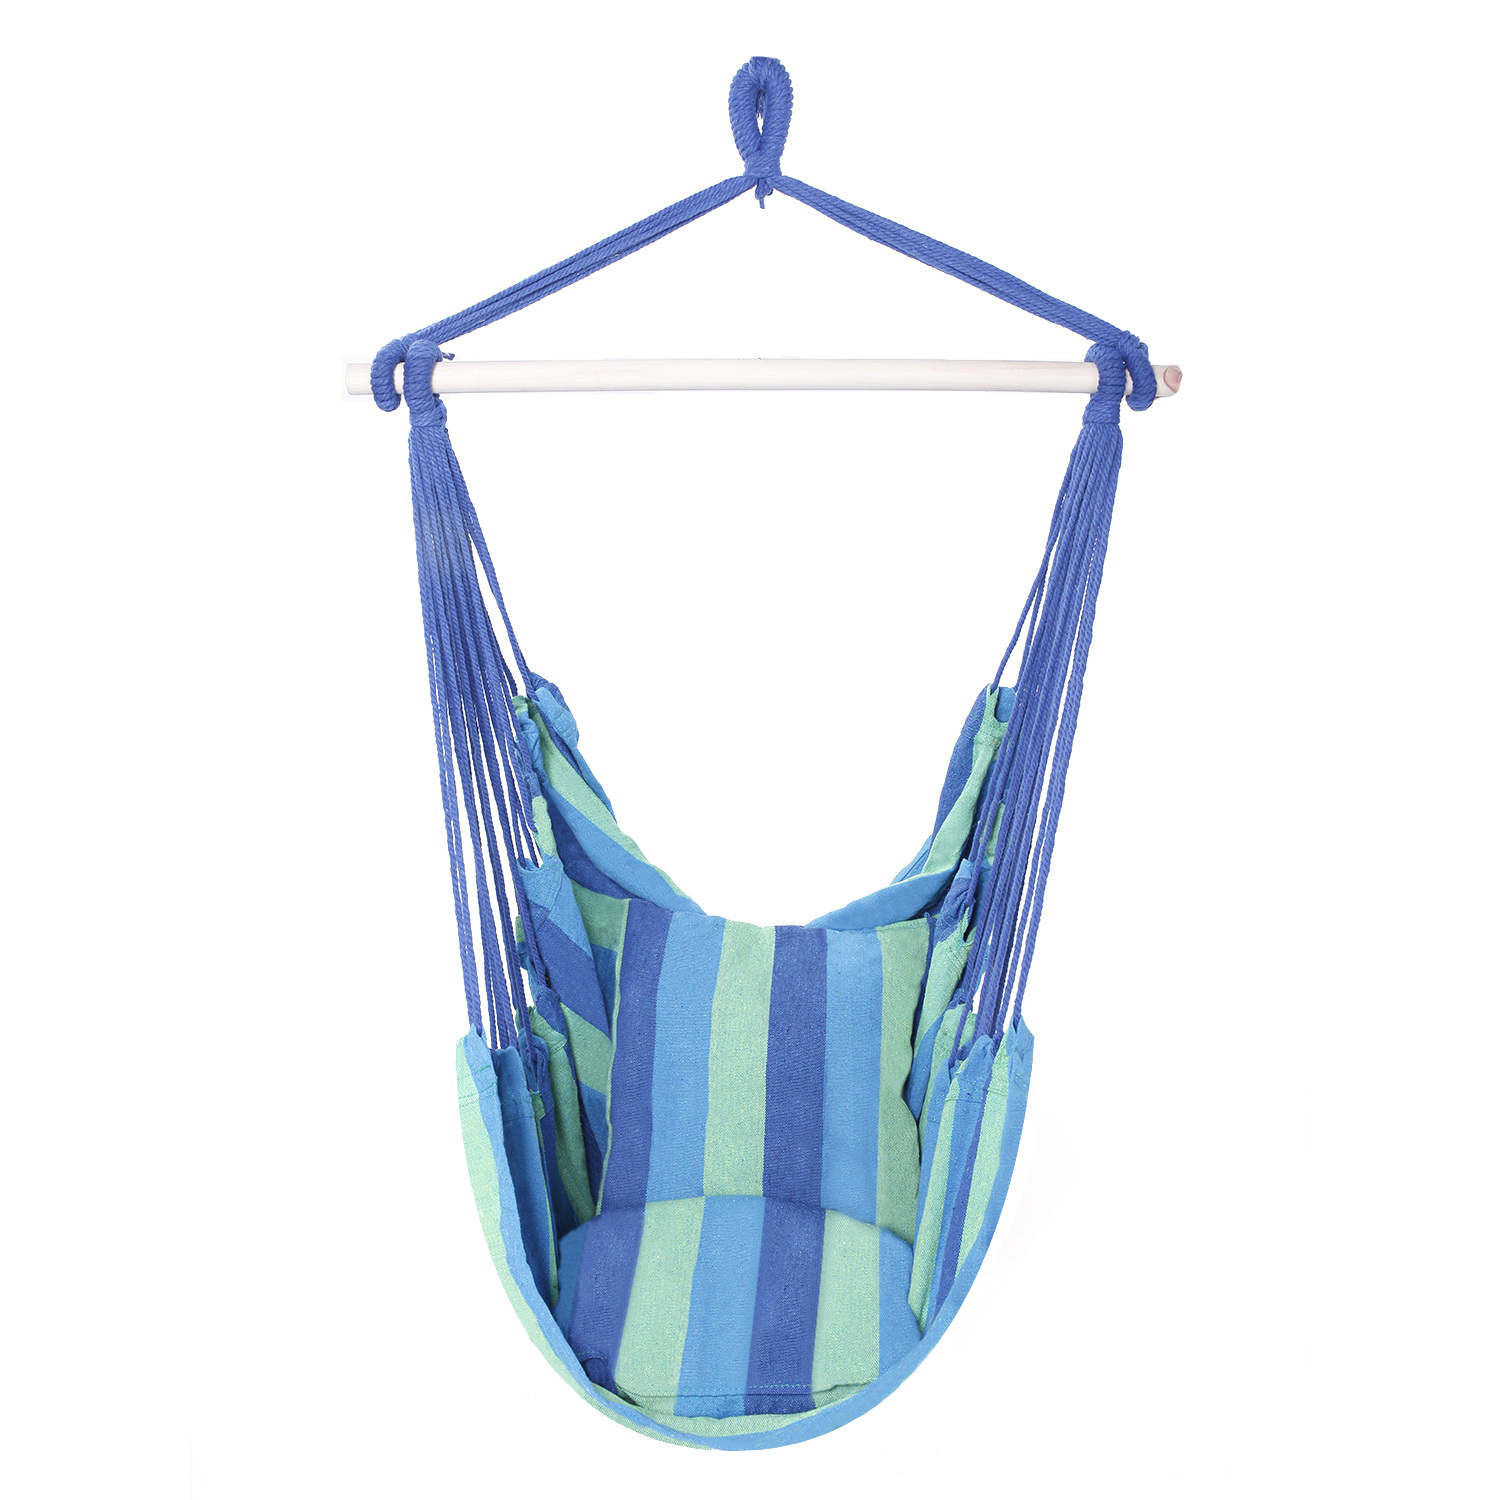 Kepooman Cotton Canvas Hammock Hanging Rope Chair, Hanging Bubble Chair Porch Swing Seat Swing Chair Camping Portable for Patio, Deck, Yard, Indoor Bedroom Garden with 2 Pillows Blue Stripe - image 2 of 5